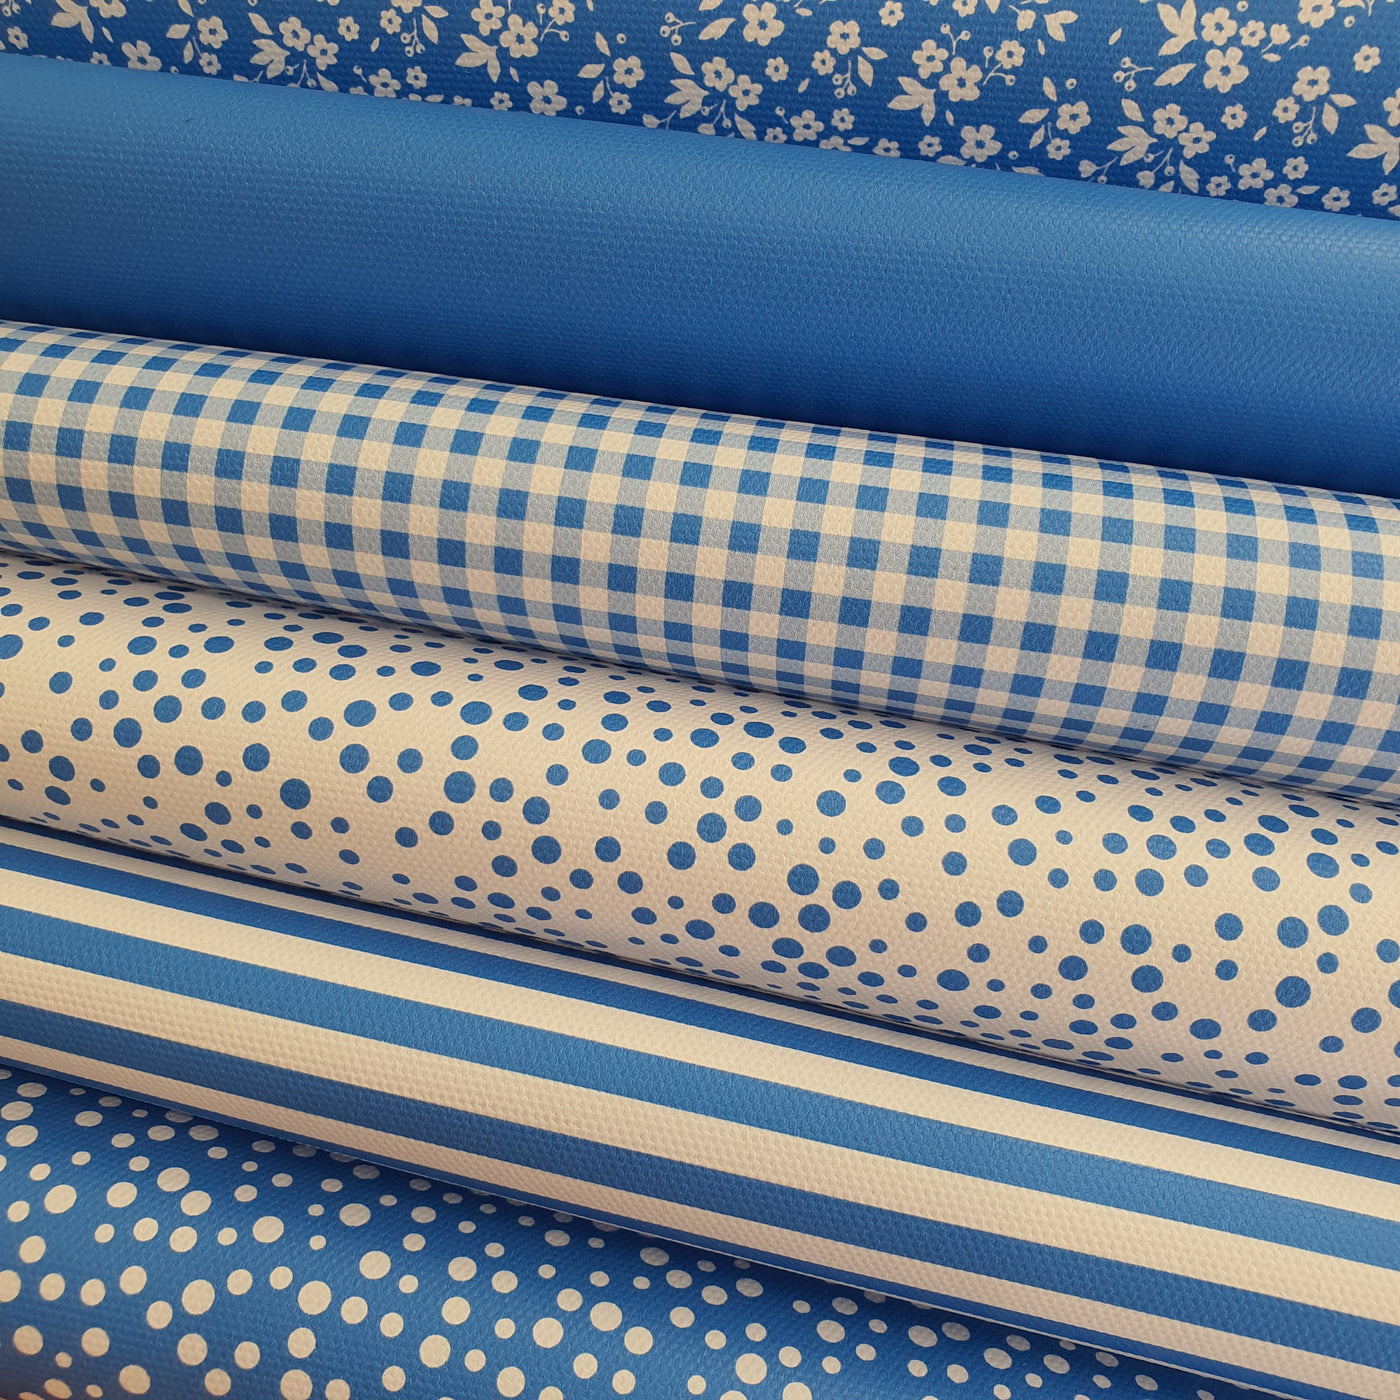 School blue gingham solid stripe dots flower - faux Pu Leather vinyl - canvas - choose Fabric material Sheets